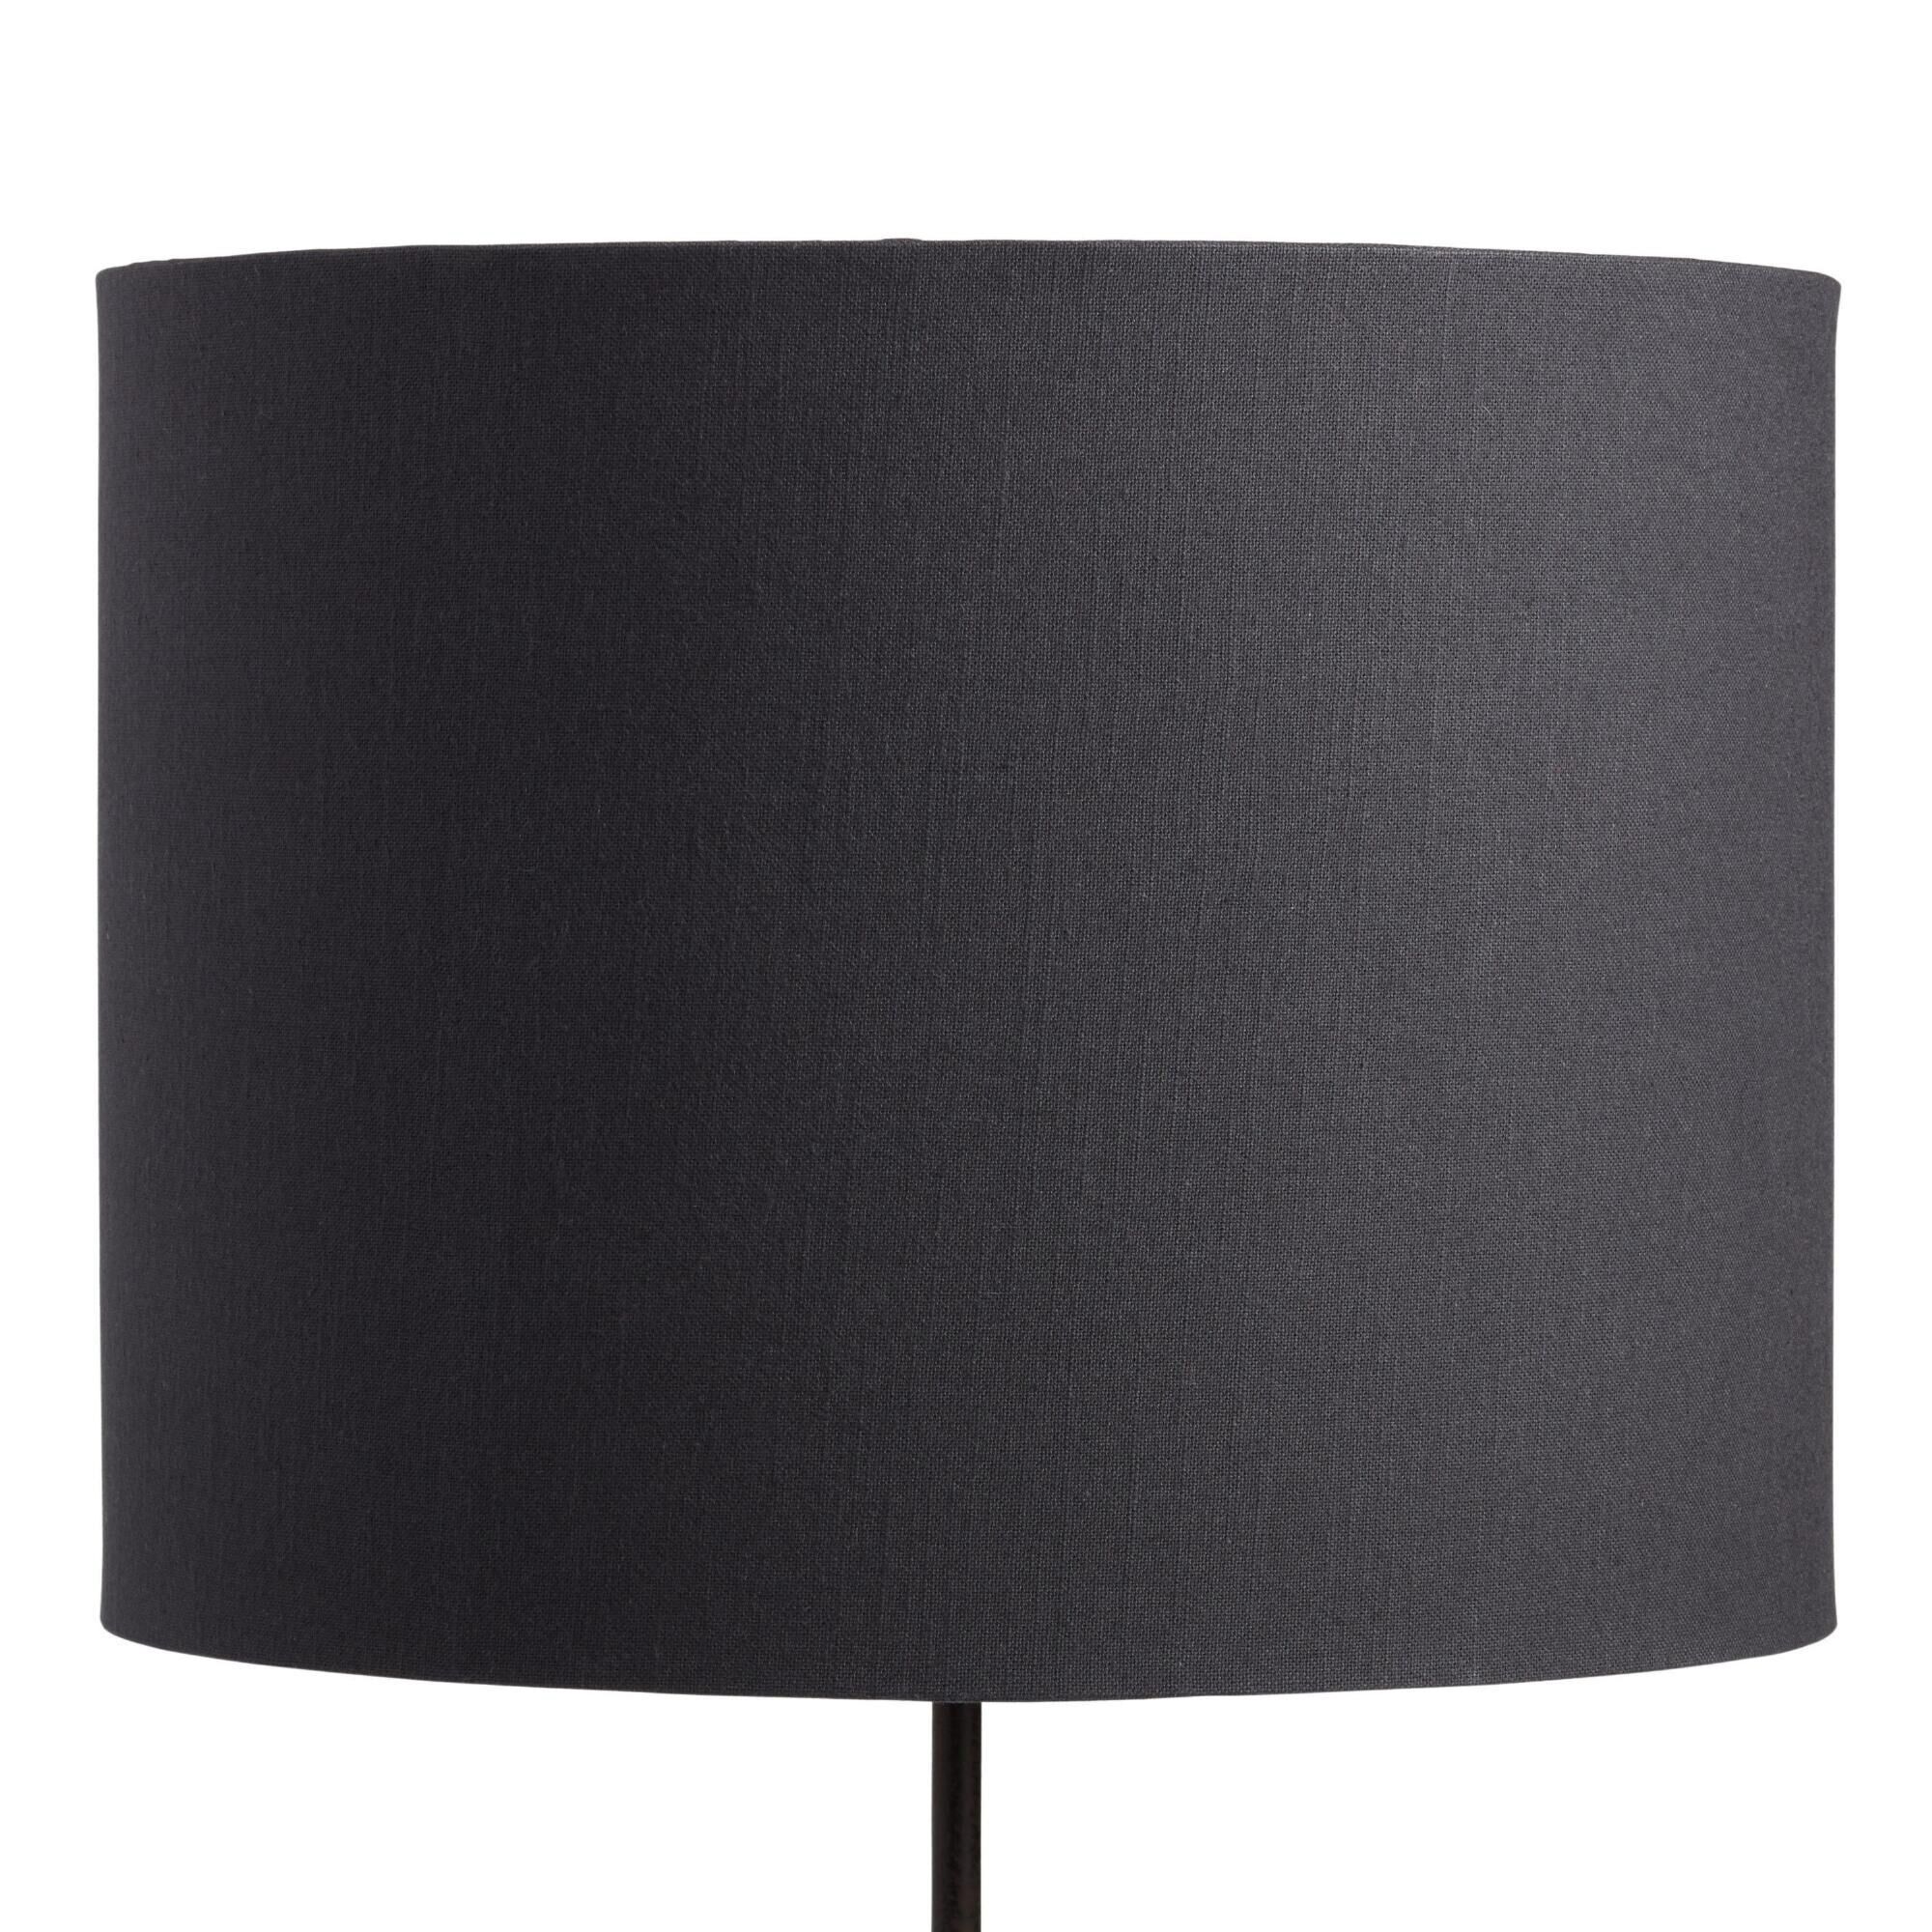 Black Linen Drum Table Lamp Shade with Gold Lining - World Market